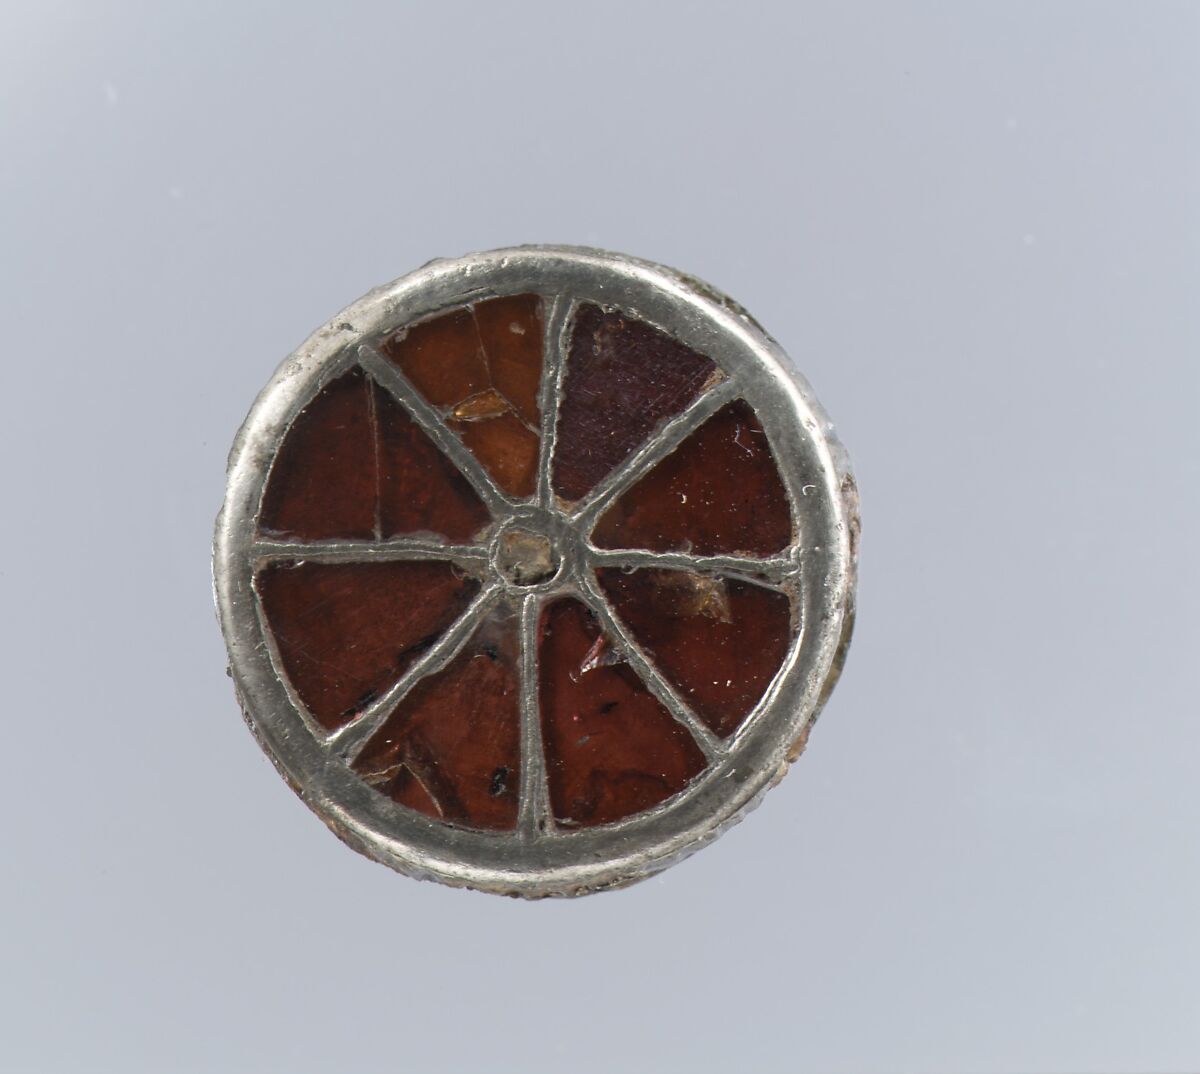 Disk Brooch, Silver, garnets with patterned foil backings, central inlay, Frankish 